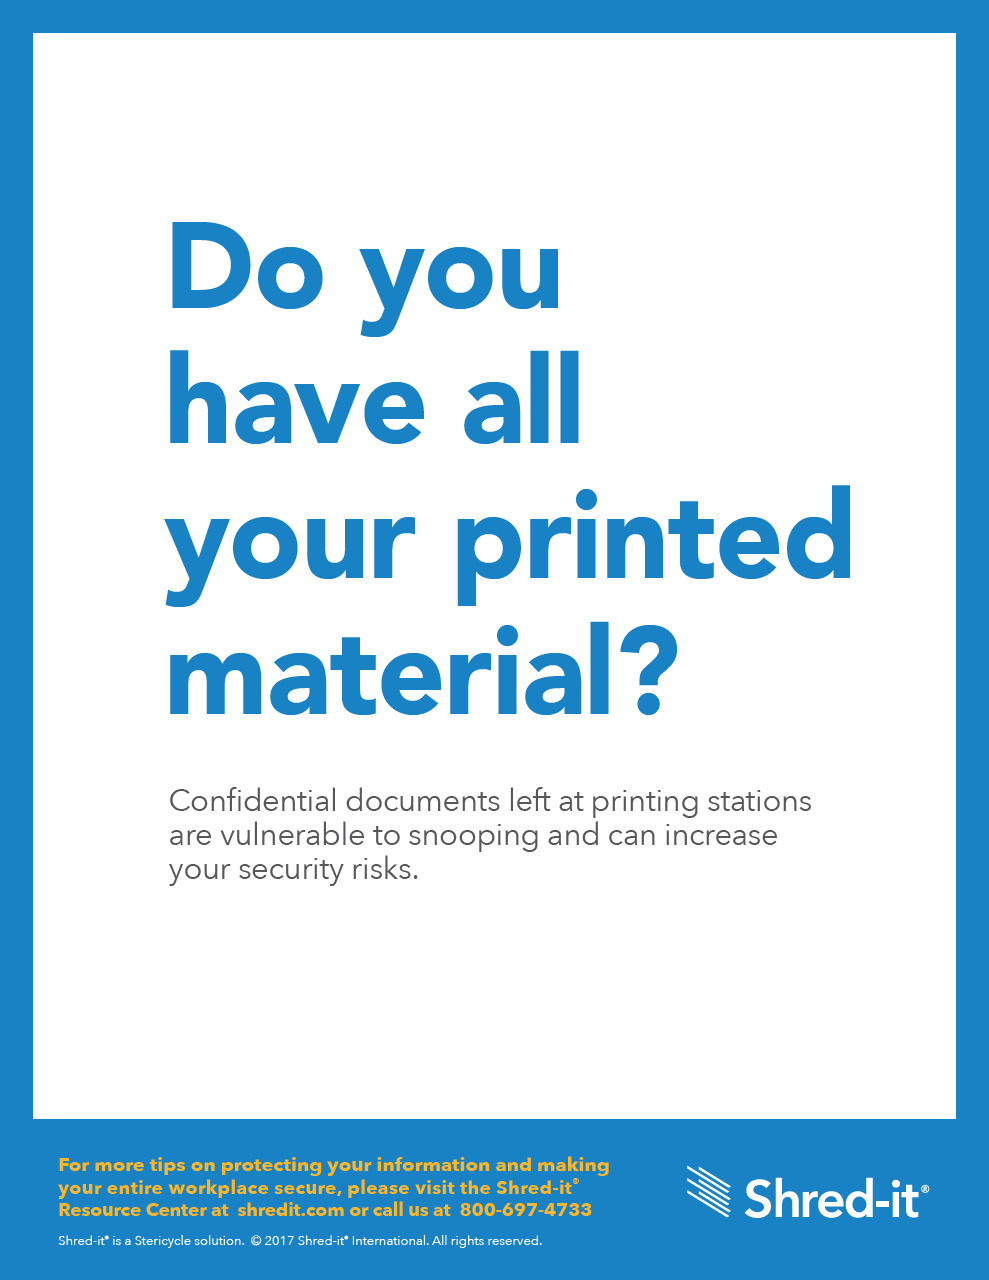 Shred-it-Security-Plan-Reminders-Posters.pdf